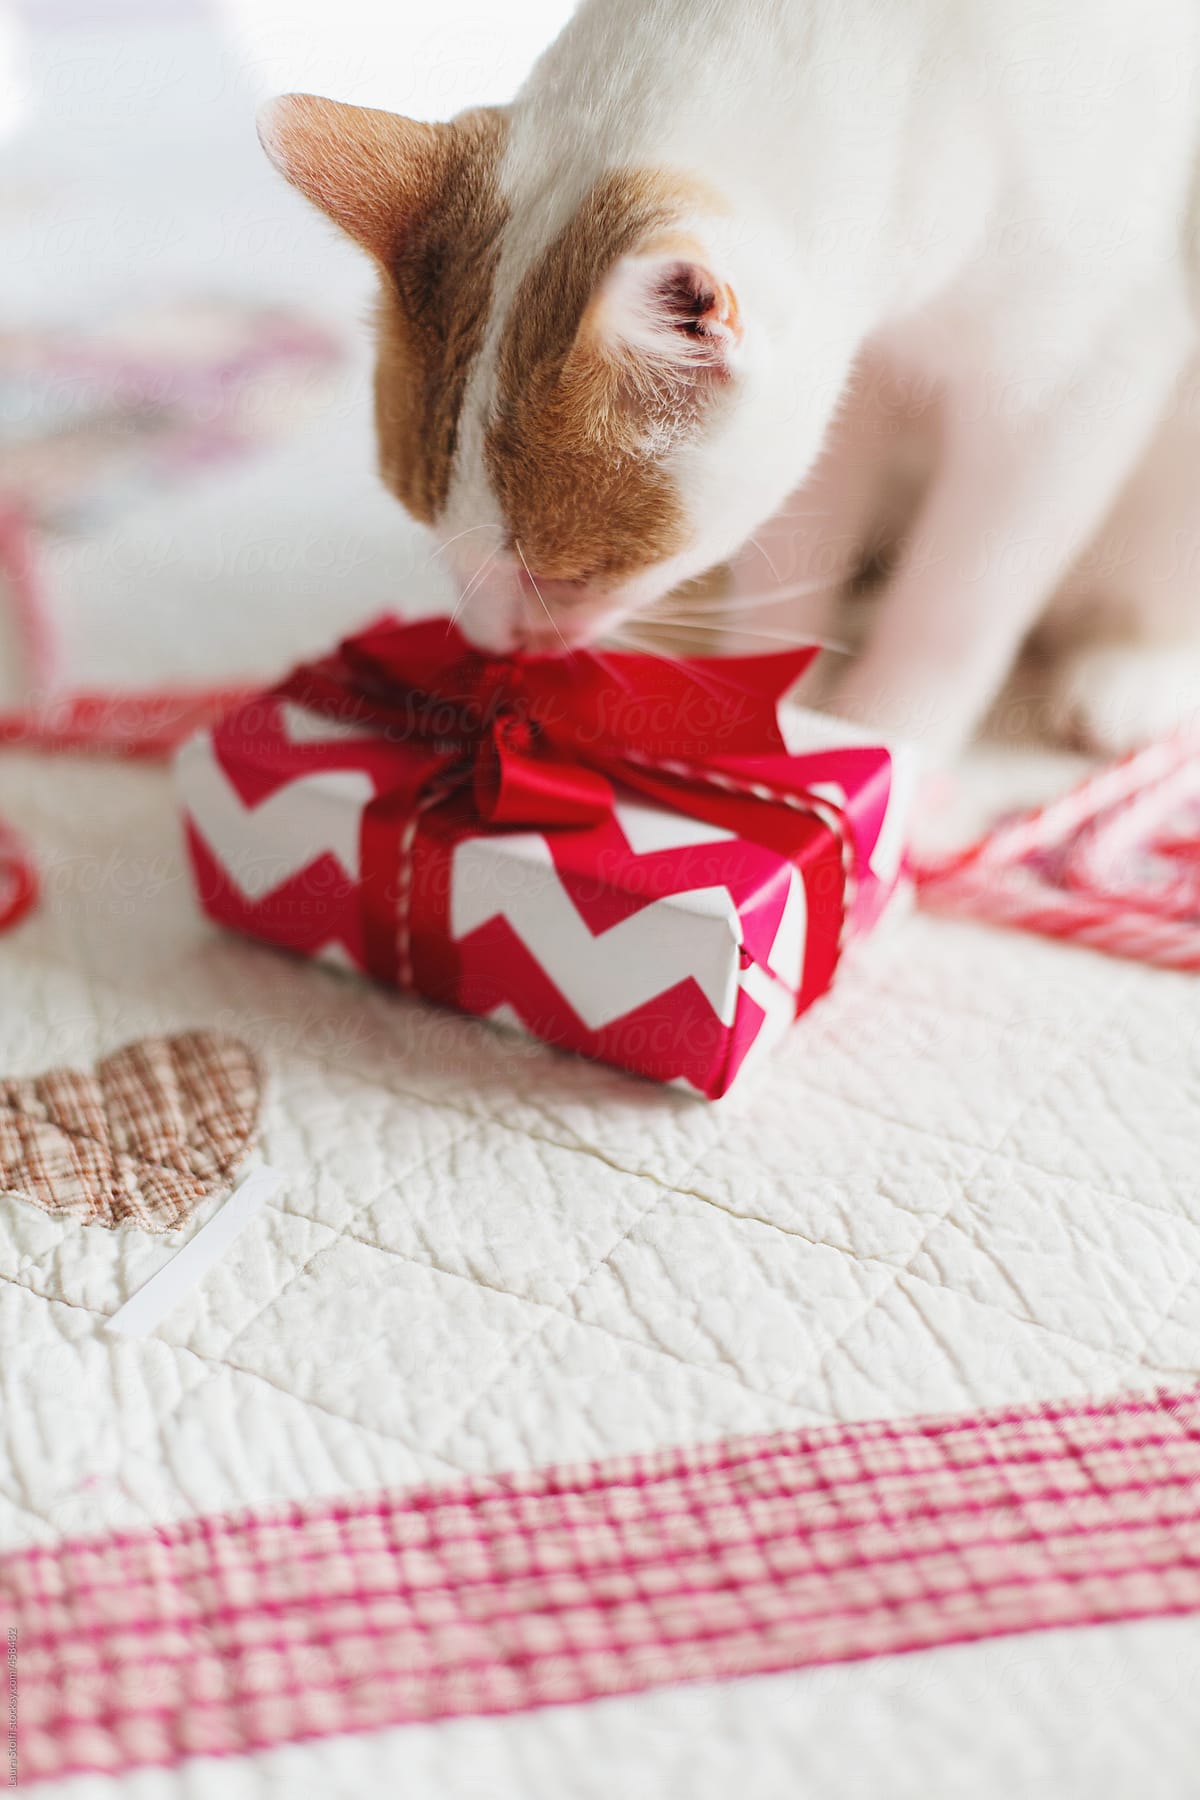 Is this gift for me? Curious cat and wrapped present on table